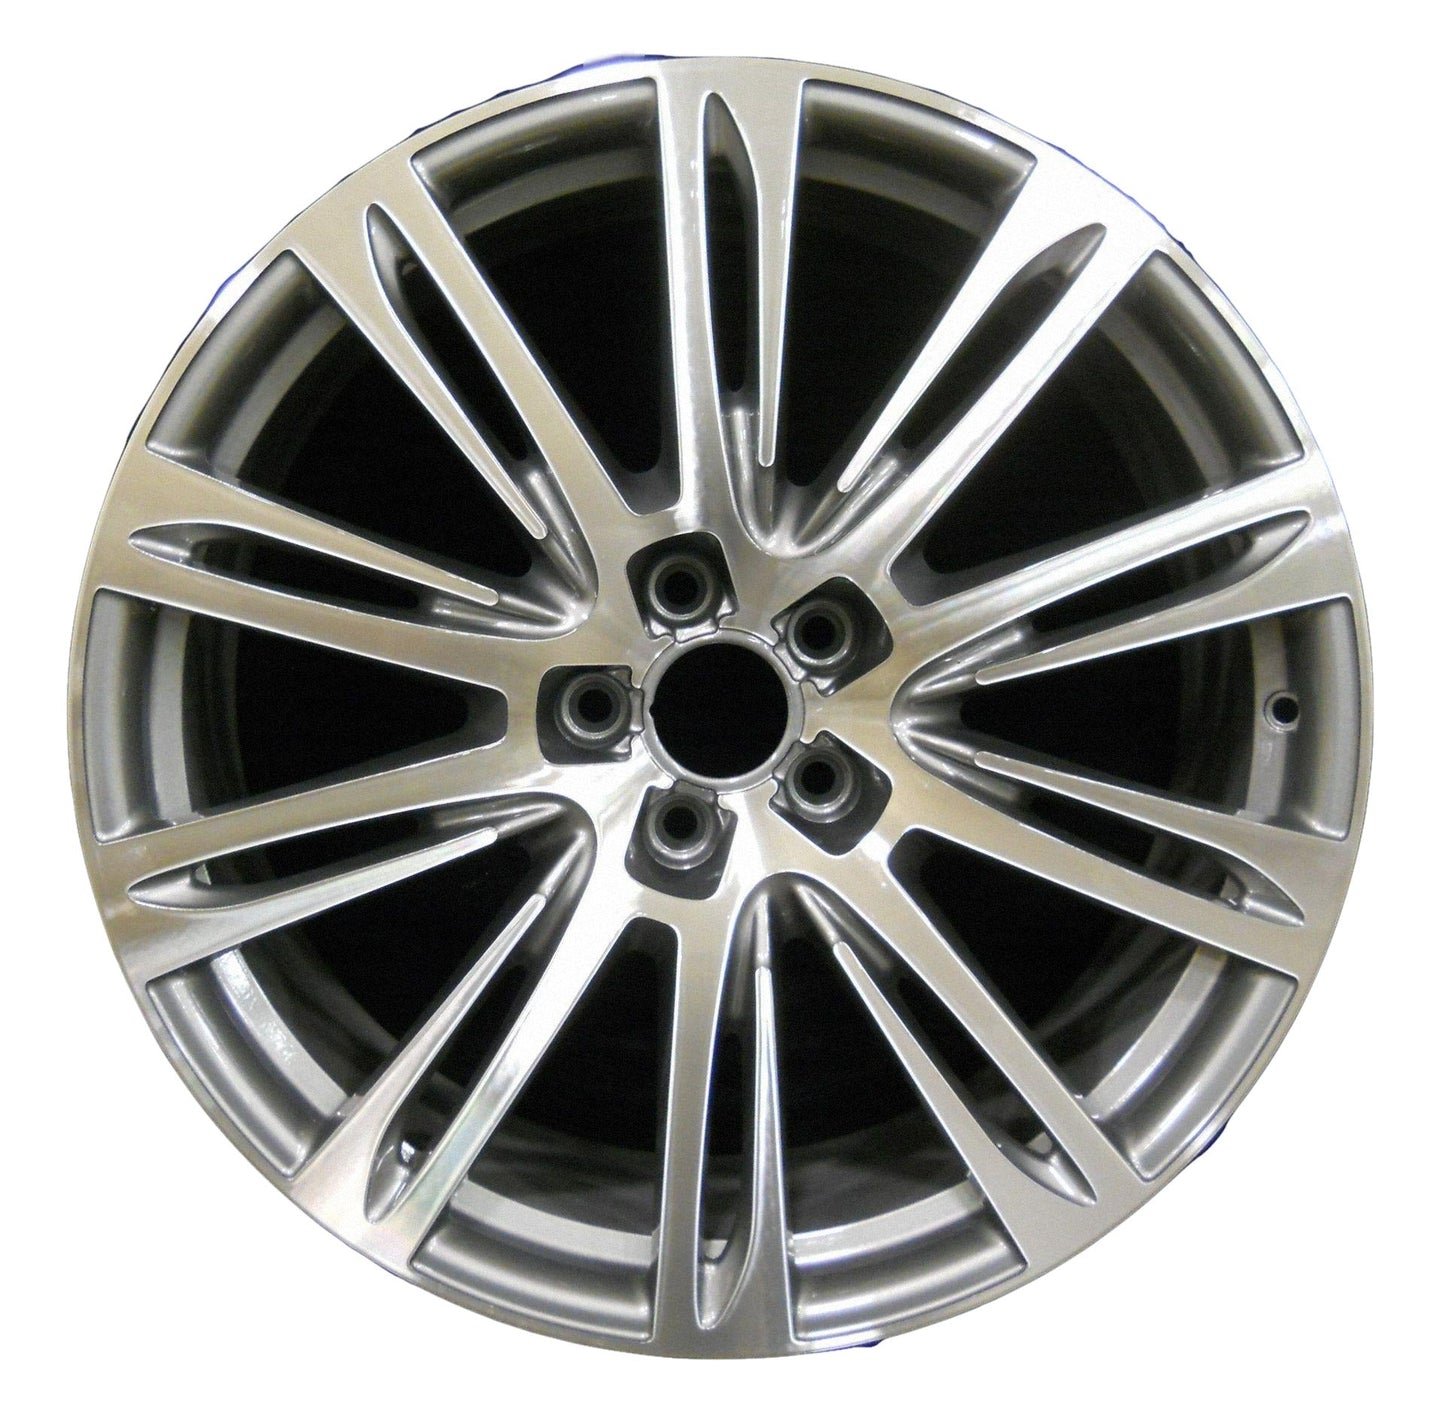 Audi A7  2012, 2013, 2014, 2015 Factory OEM Car Wheel Size 20x9 Alloy WAO.58871.LC23.MABRT